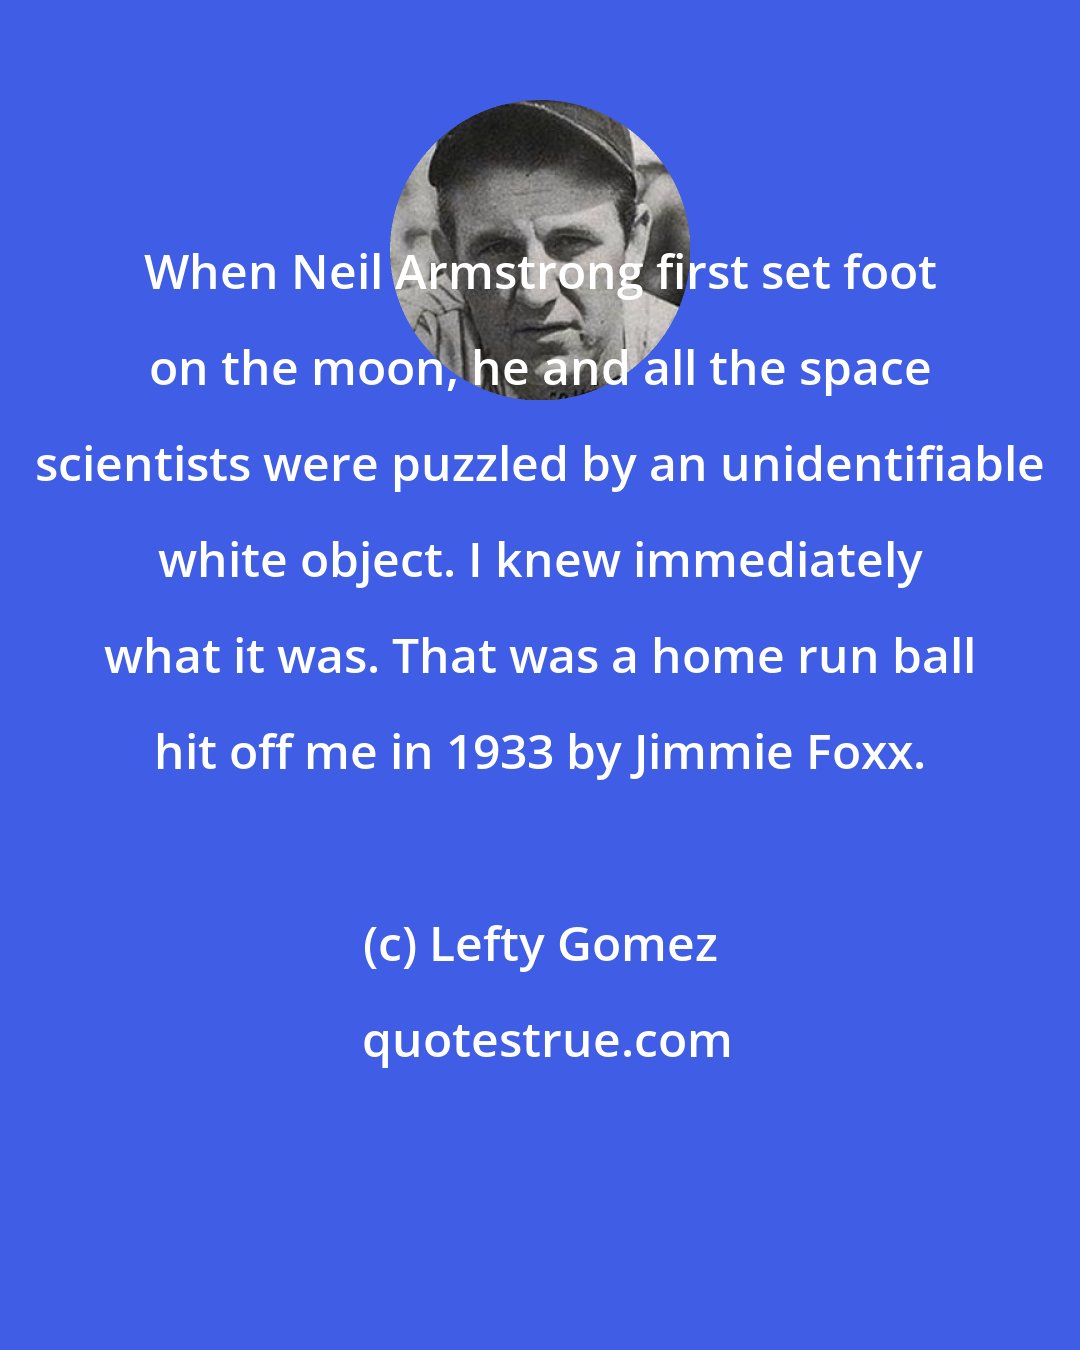 Lefty Gomez: When Neil Armstrong first set foot on the moon, he and all the space scientists were puzzled by an unidentifiable white object. I knew immediately what it was. That was a home run ball hit off me in 1933 by Jimmie Foxx.